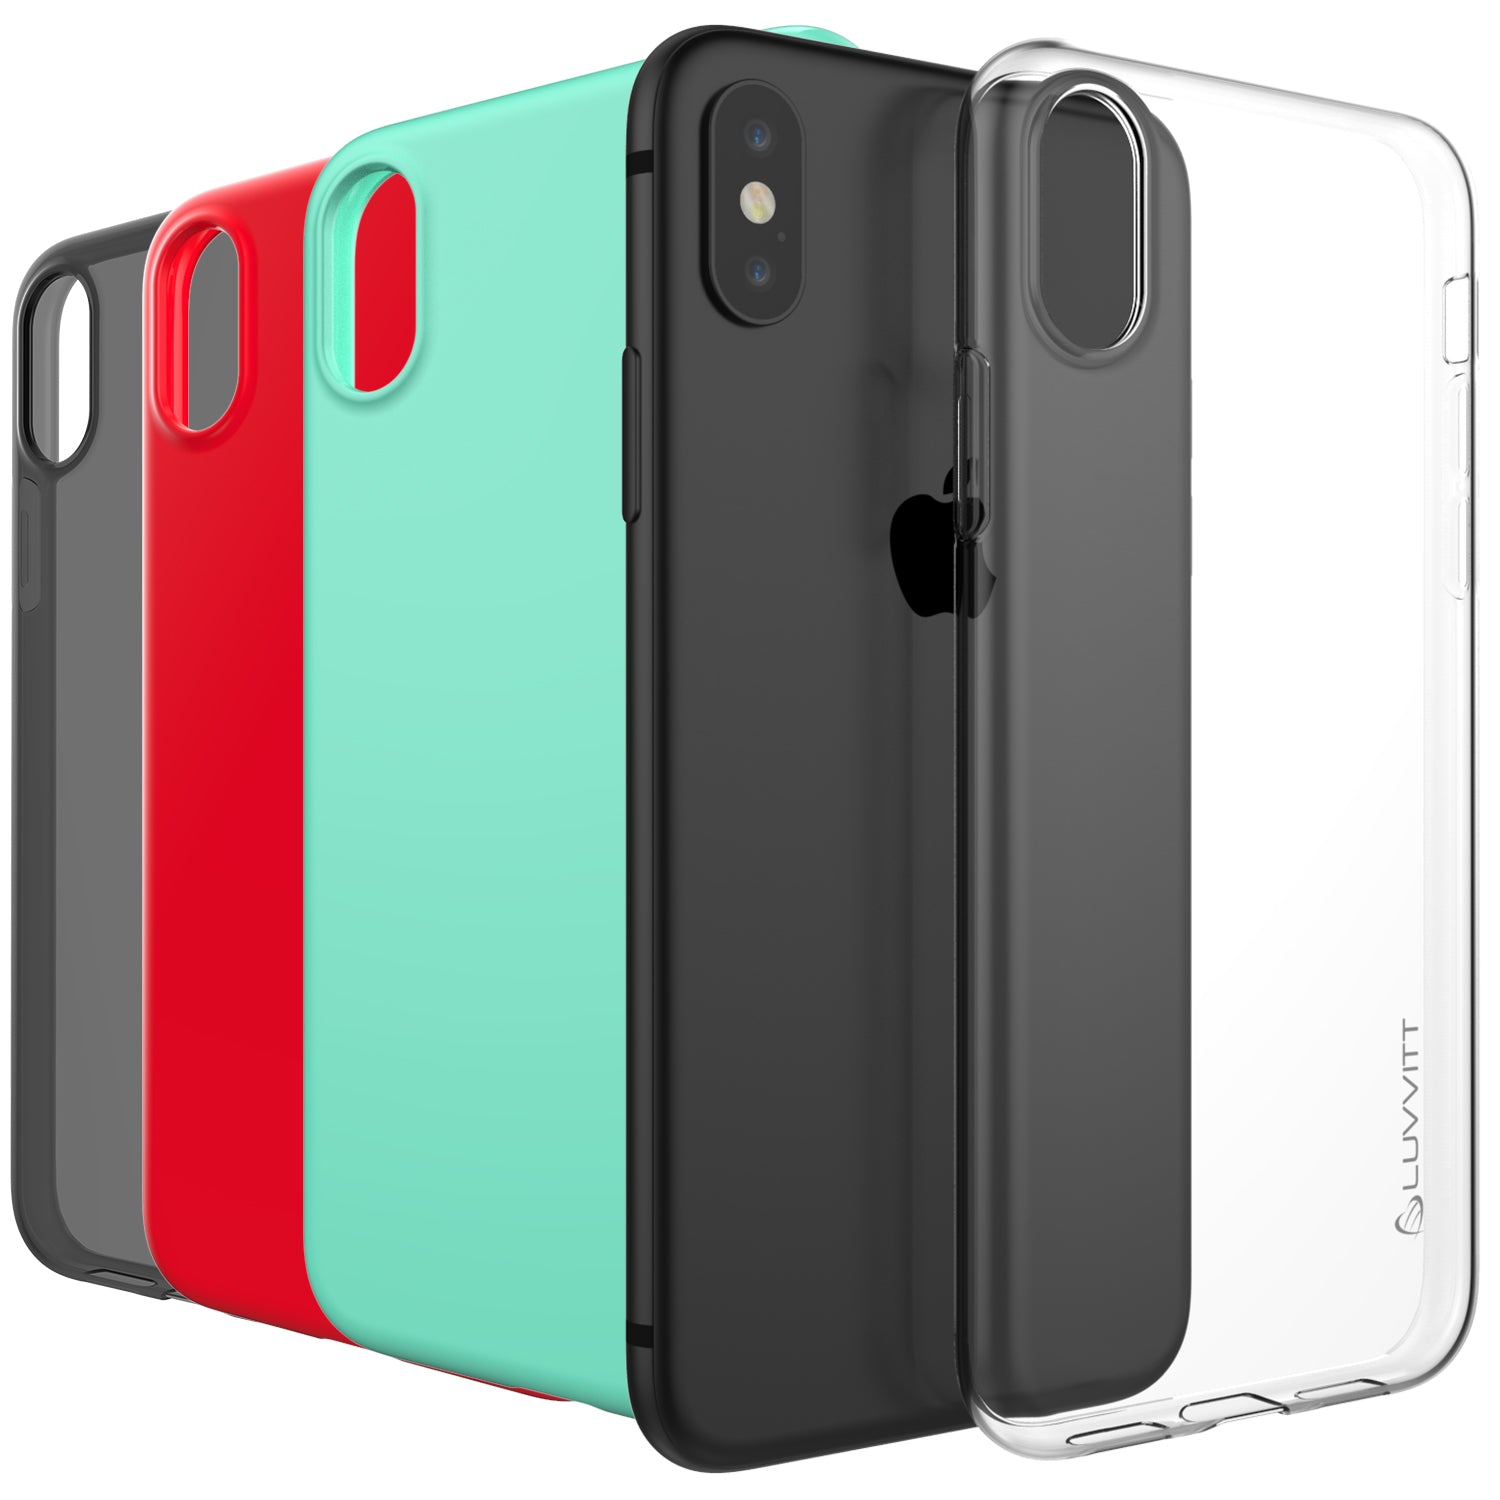 Luvvitt Clarity Case for iPhone X / XS Slim Flexible TPU Rubber Cover - 4 Pack Bundle